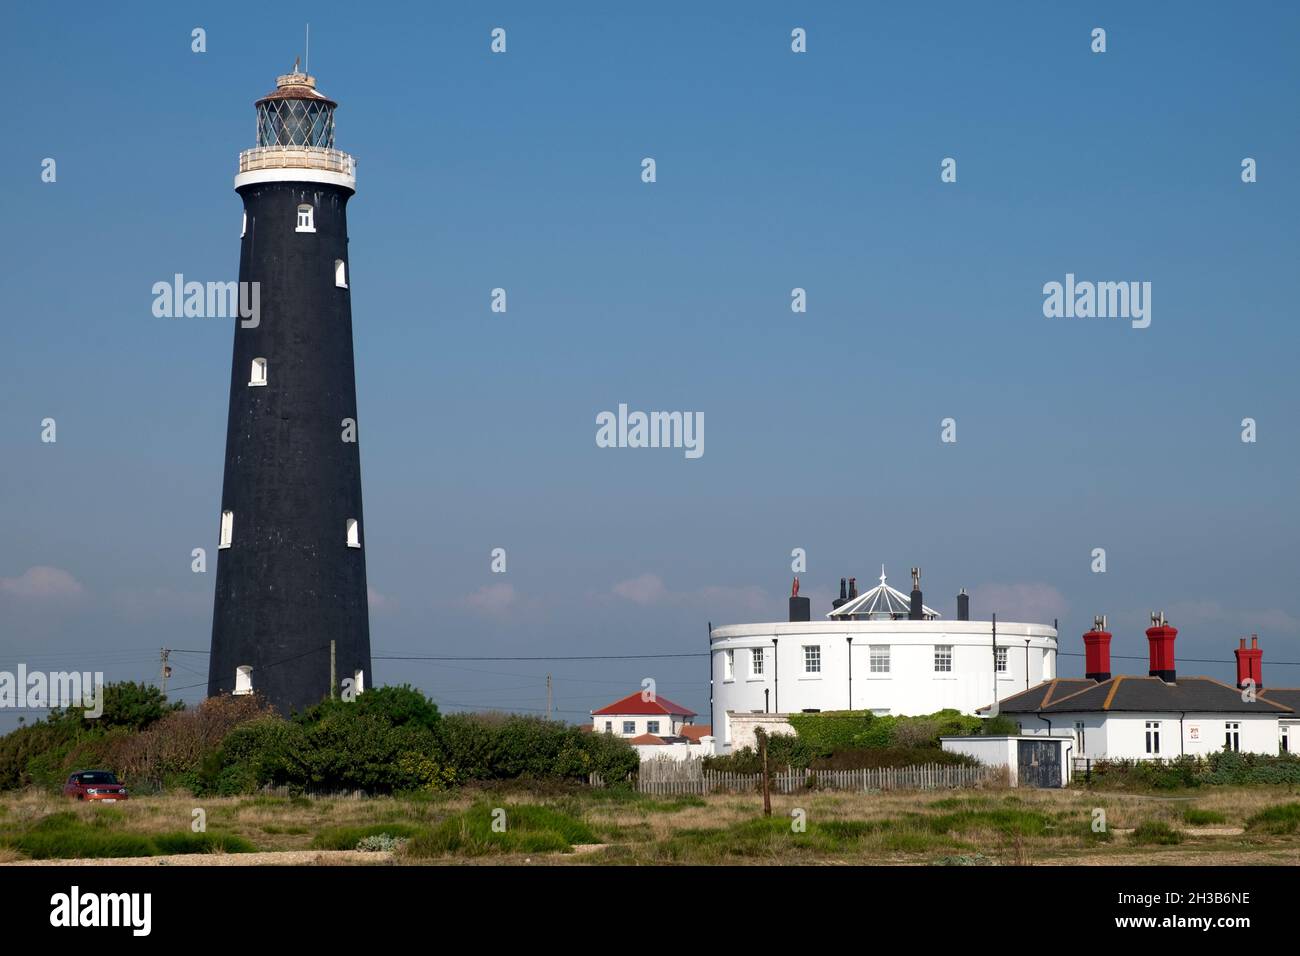 Old lighthouse near Dungeness Nuclear Power Station in Kent UK Kent England UK Great Britain    KATHY DEWITT Stock Photo